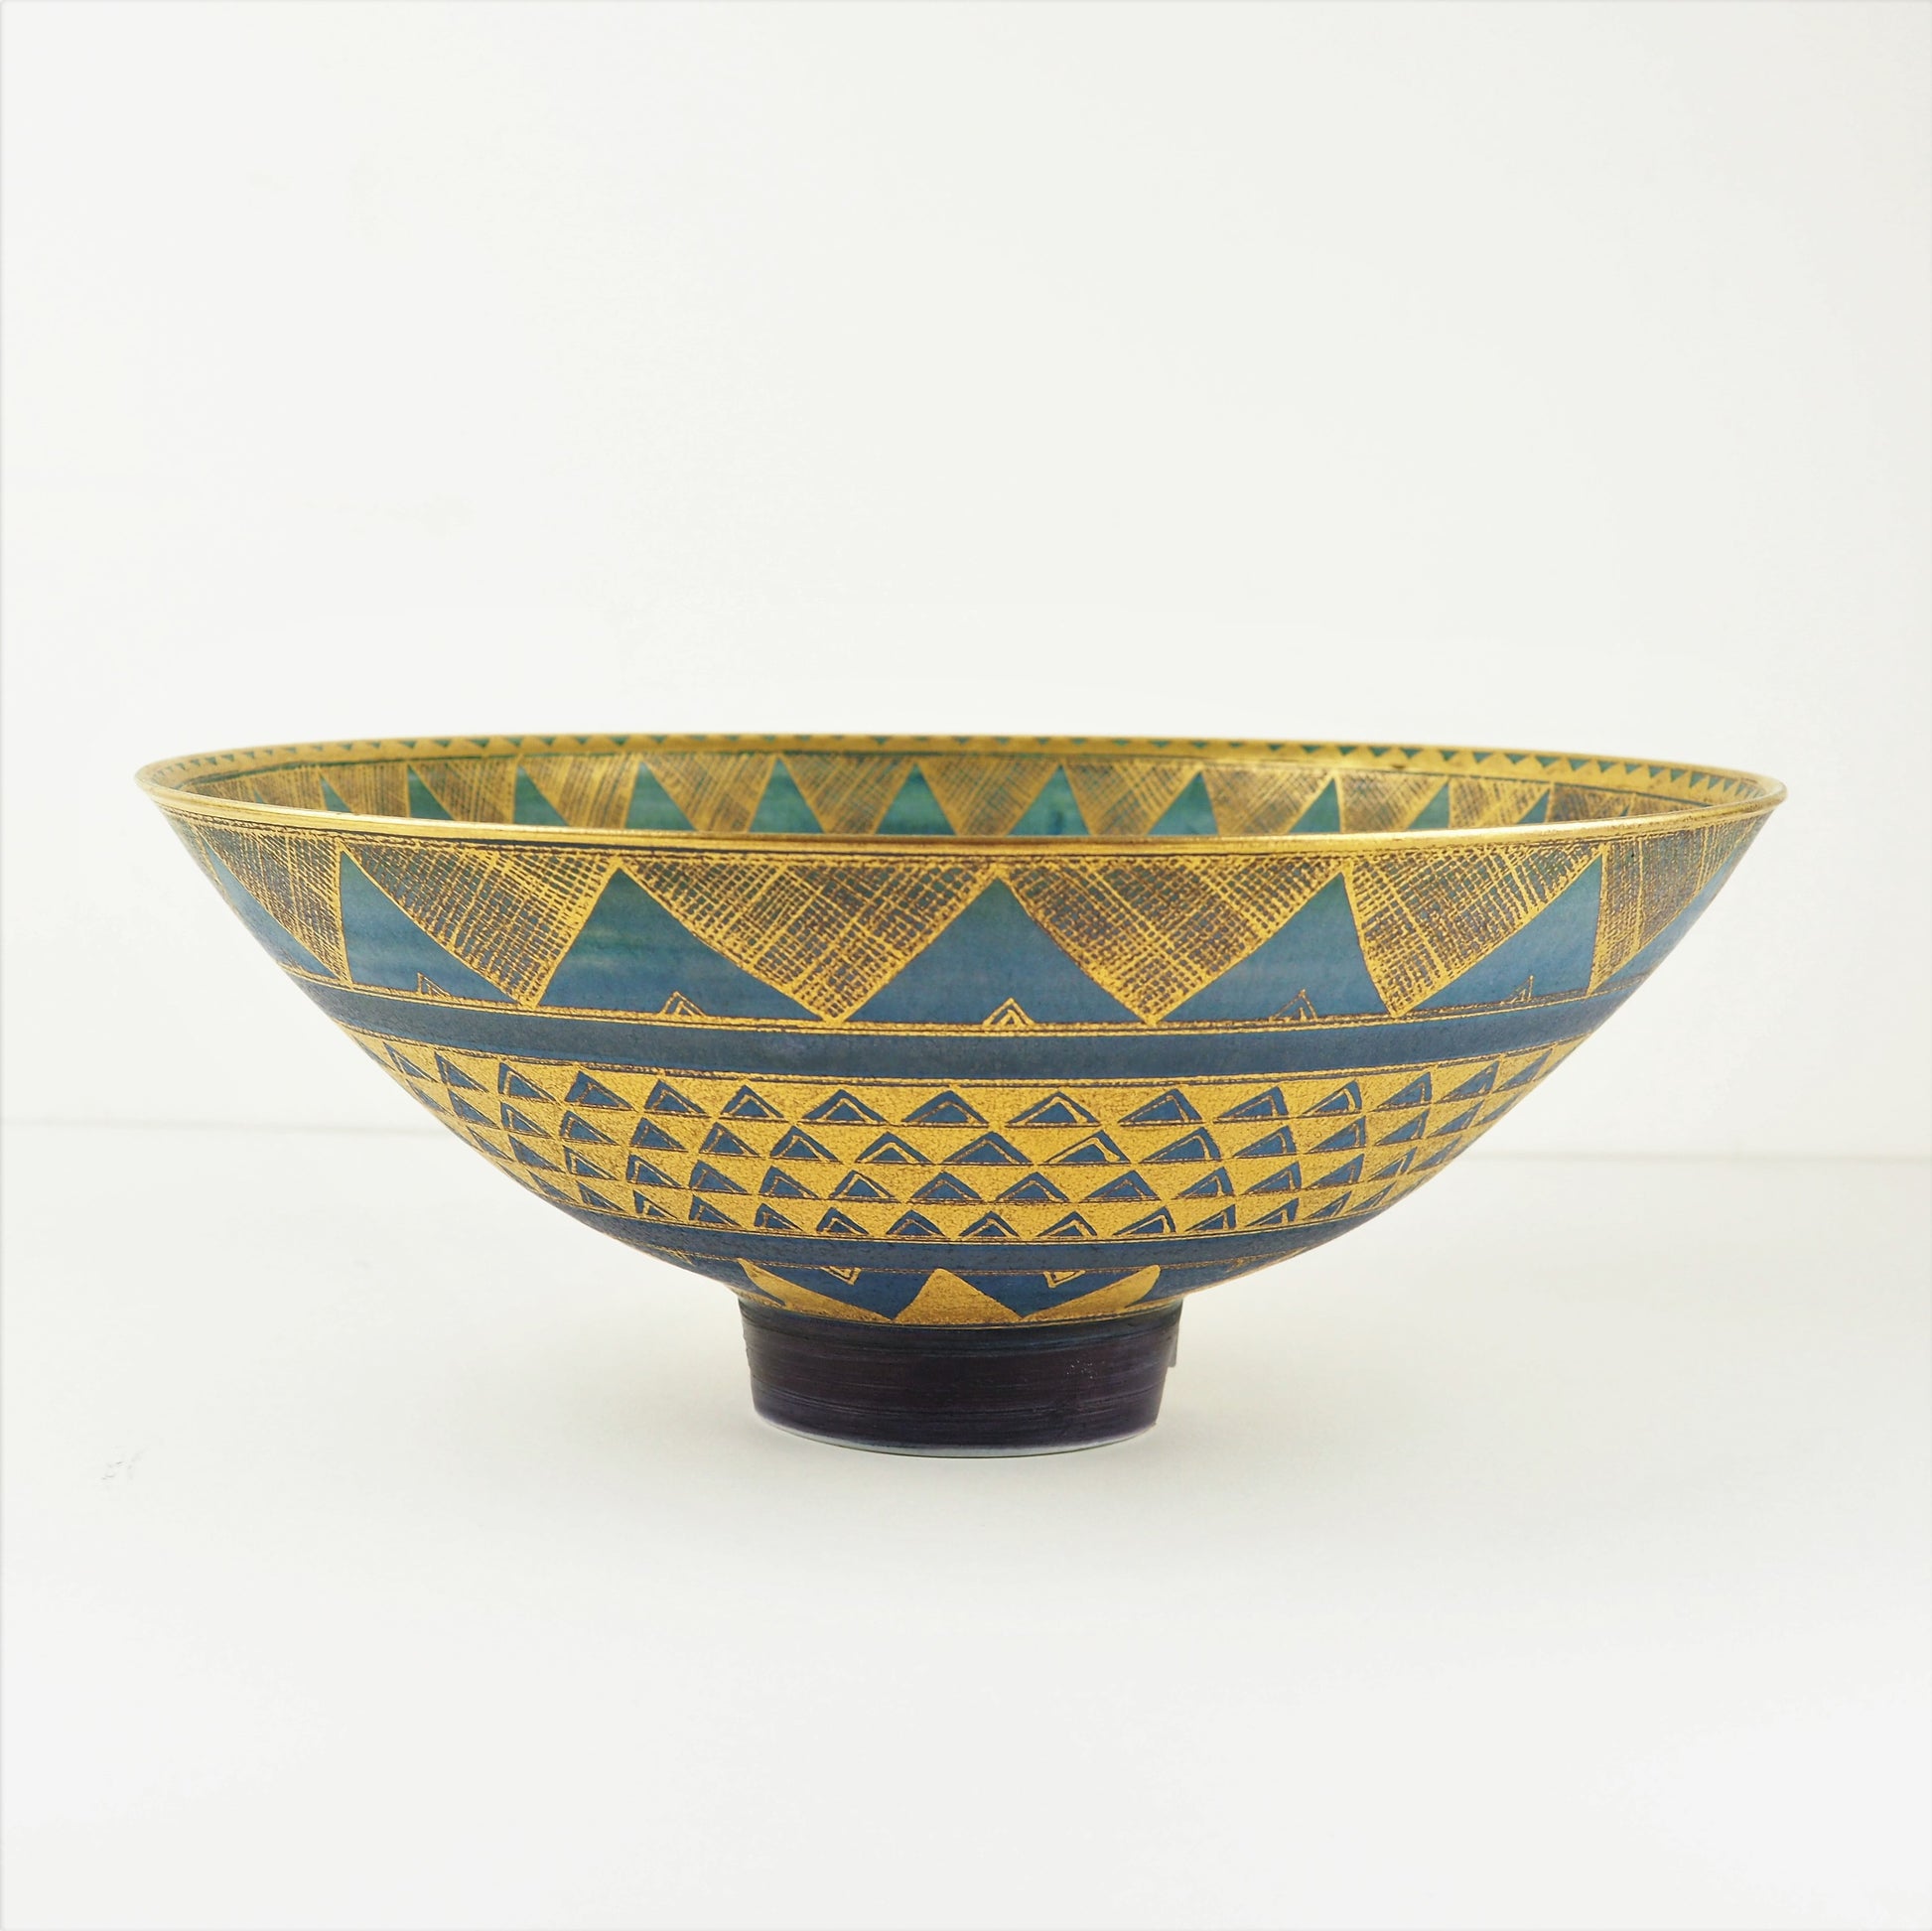 Rich, Mary - Large Porcelain Bowl | Mary Rich | Primavera Gallery